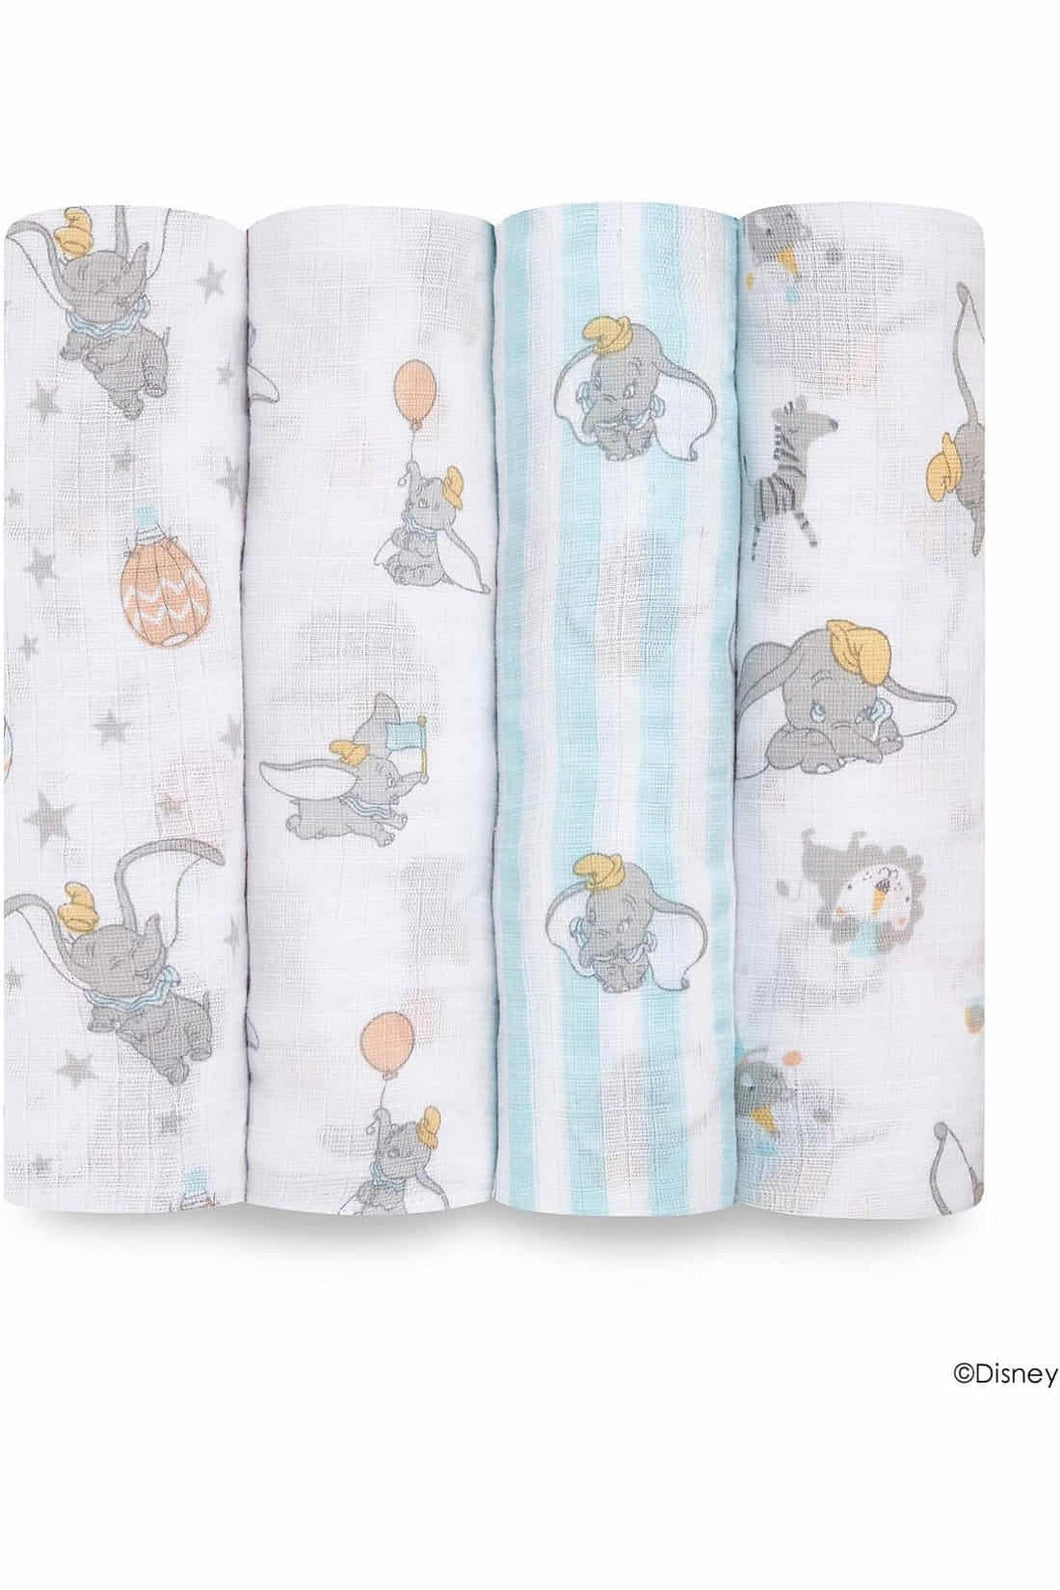 Aden + Anais Essentials Cotton Muslin Swaddles Dumbo New Heights - 4 Pack 1